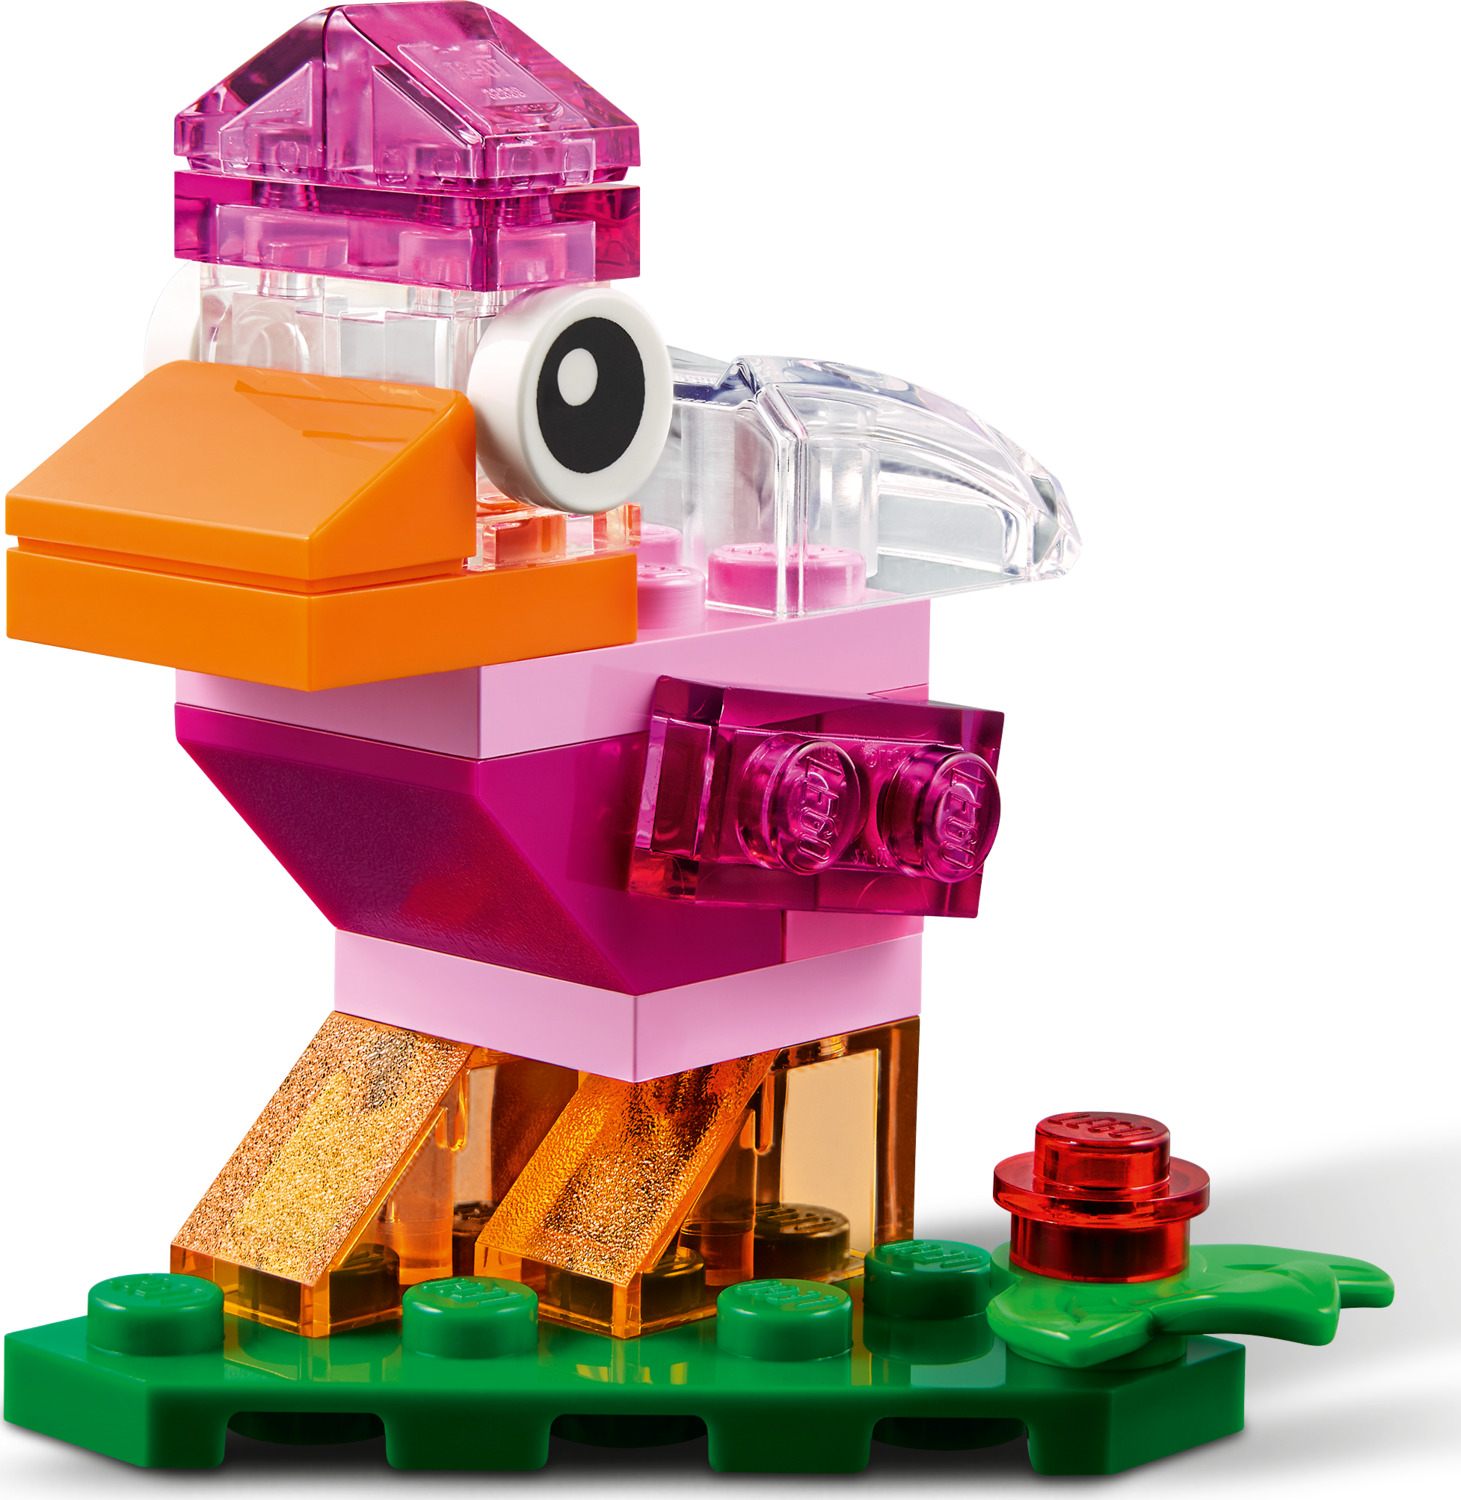 Creative Transparent Bricks 11013 | Classic | Buy online at the Official  LEGO® Shop US